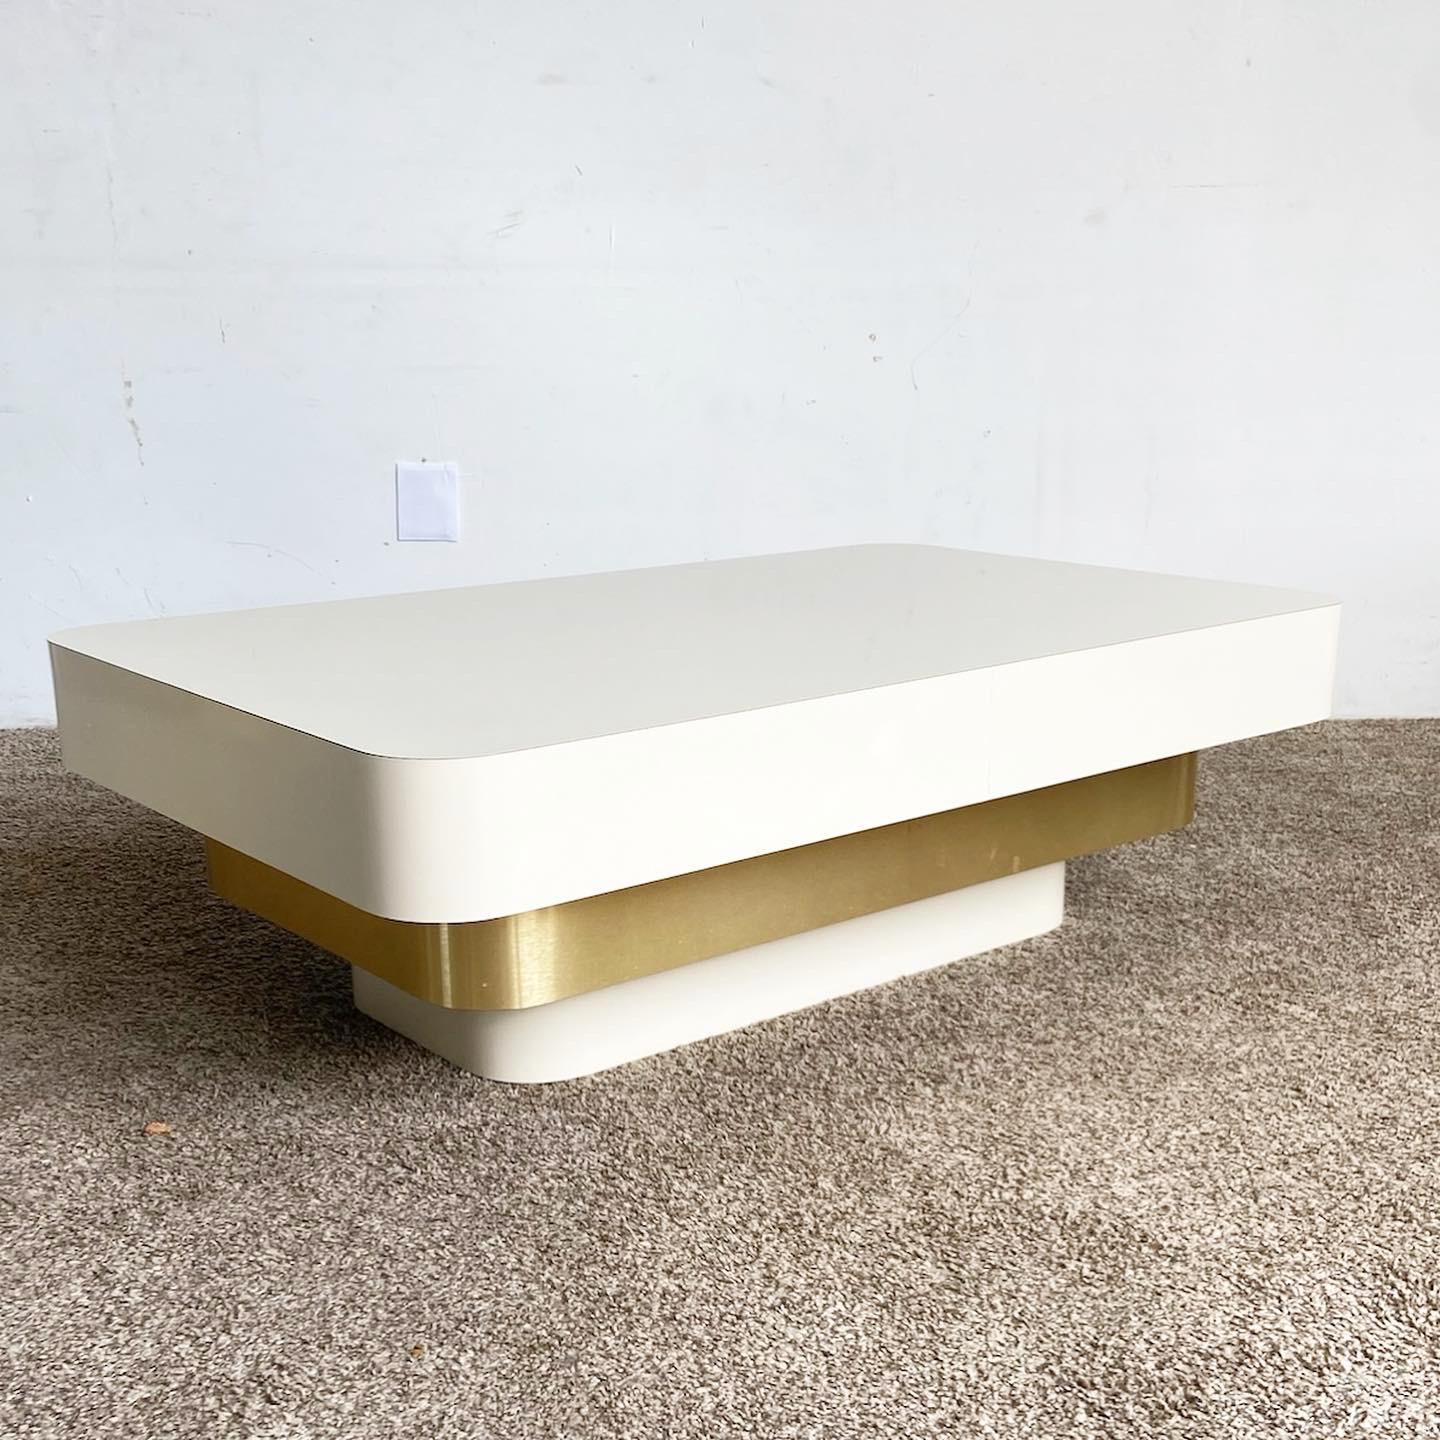 Enhance your living room with our Ascending Cream and Gold Coffee Table, featuring a unique tri-layer design that blends postmodern style with practicality.

Unique tri-layer design with top and bottom layers in sleek cream lacquer finish.
Bold gold